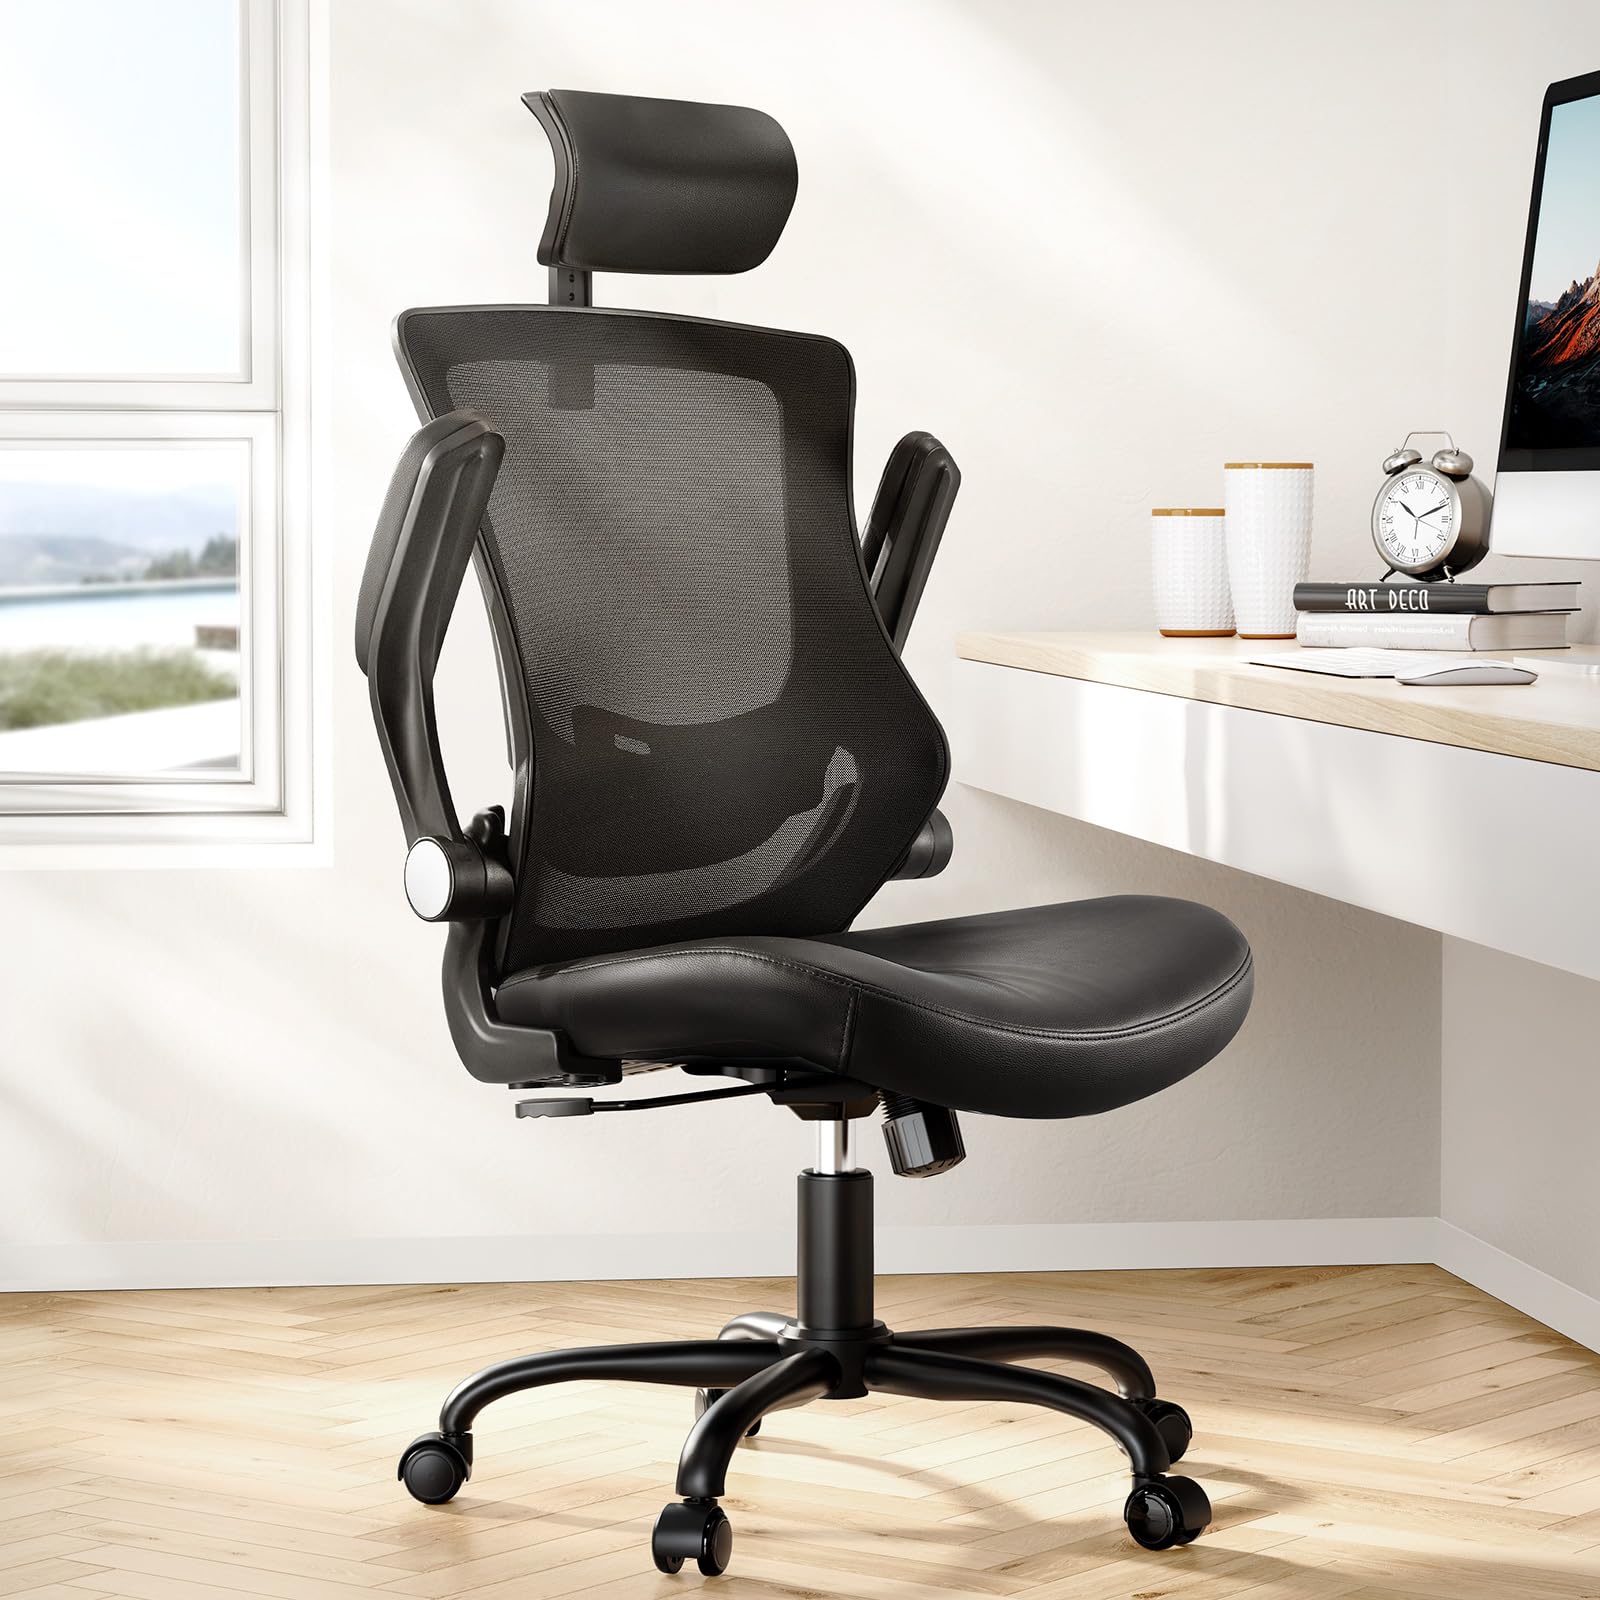 Marsail Office Chair Ergonomic Desk-Chair with PU Leather Seat,Adjustable Lumbar Support&Flip-up Armrests, Adjustable Height,Black $99.89